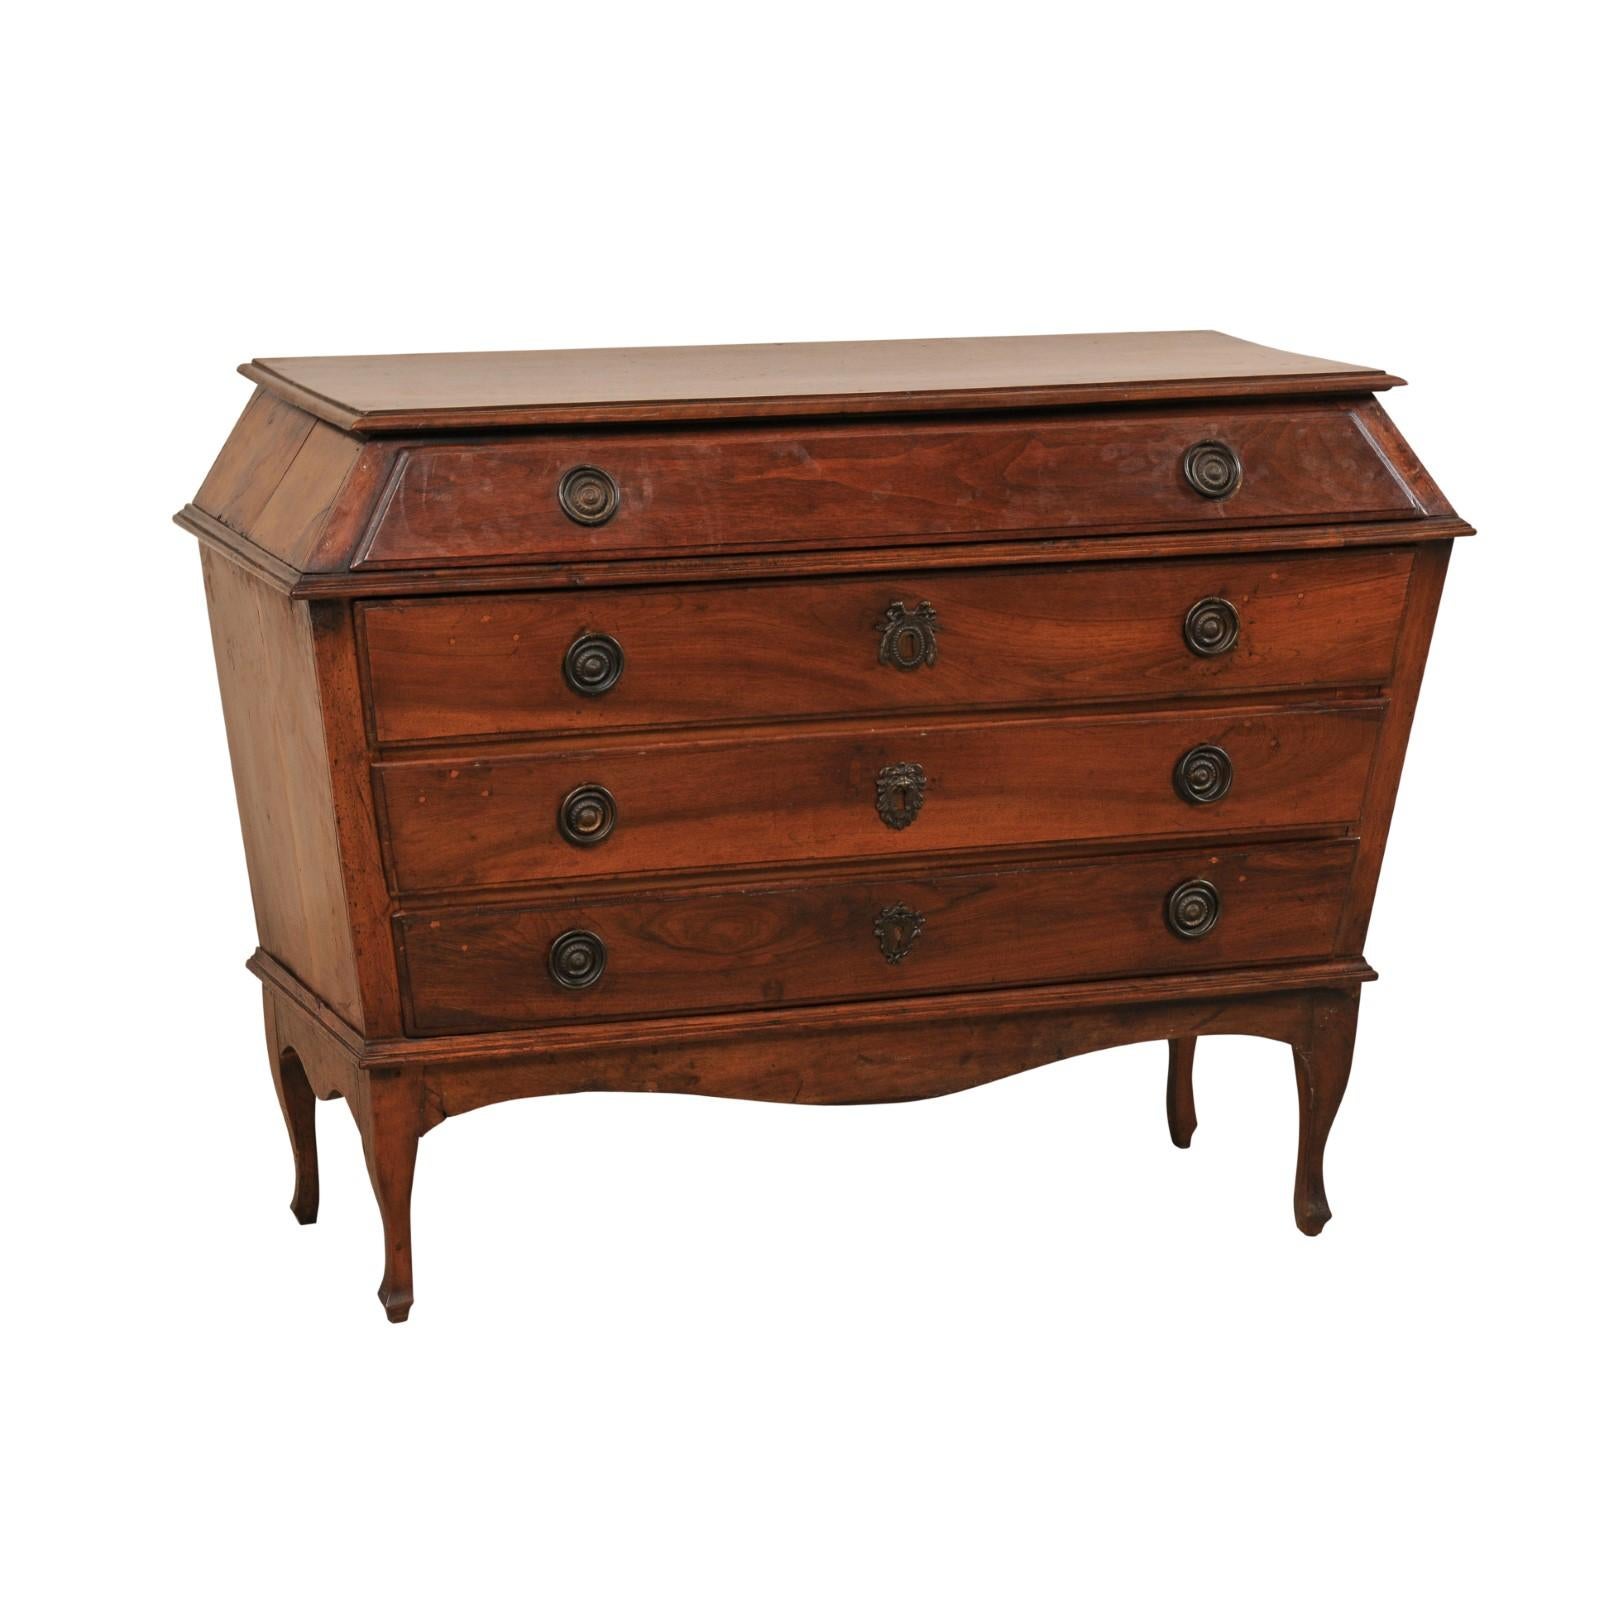 An Exceptional Late 18th C. Italian Walnut Commode w/ Unique Triangulated Shape For Sale